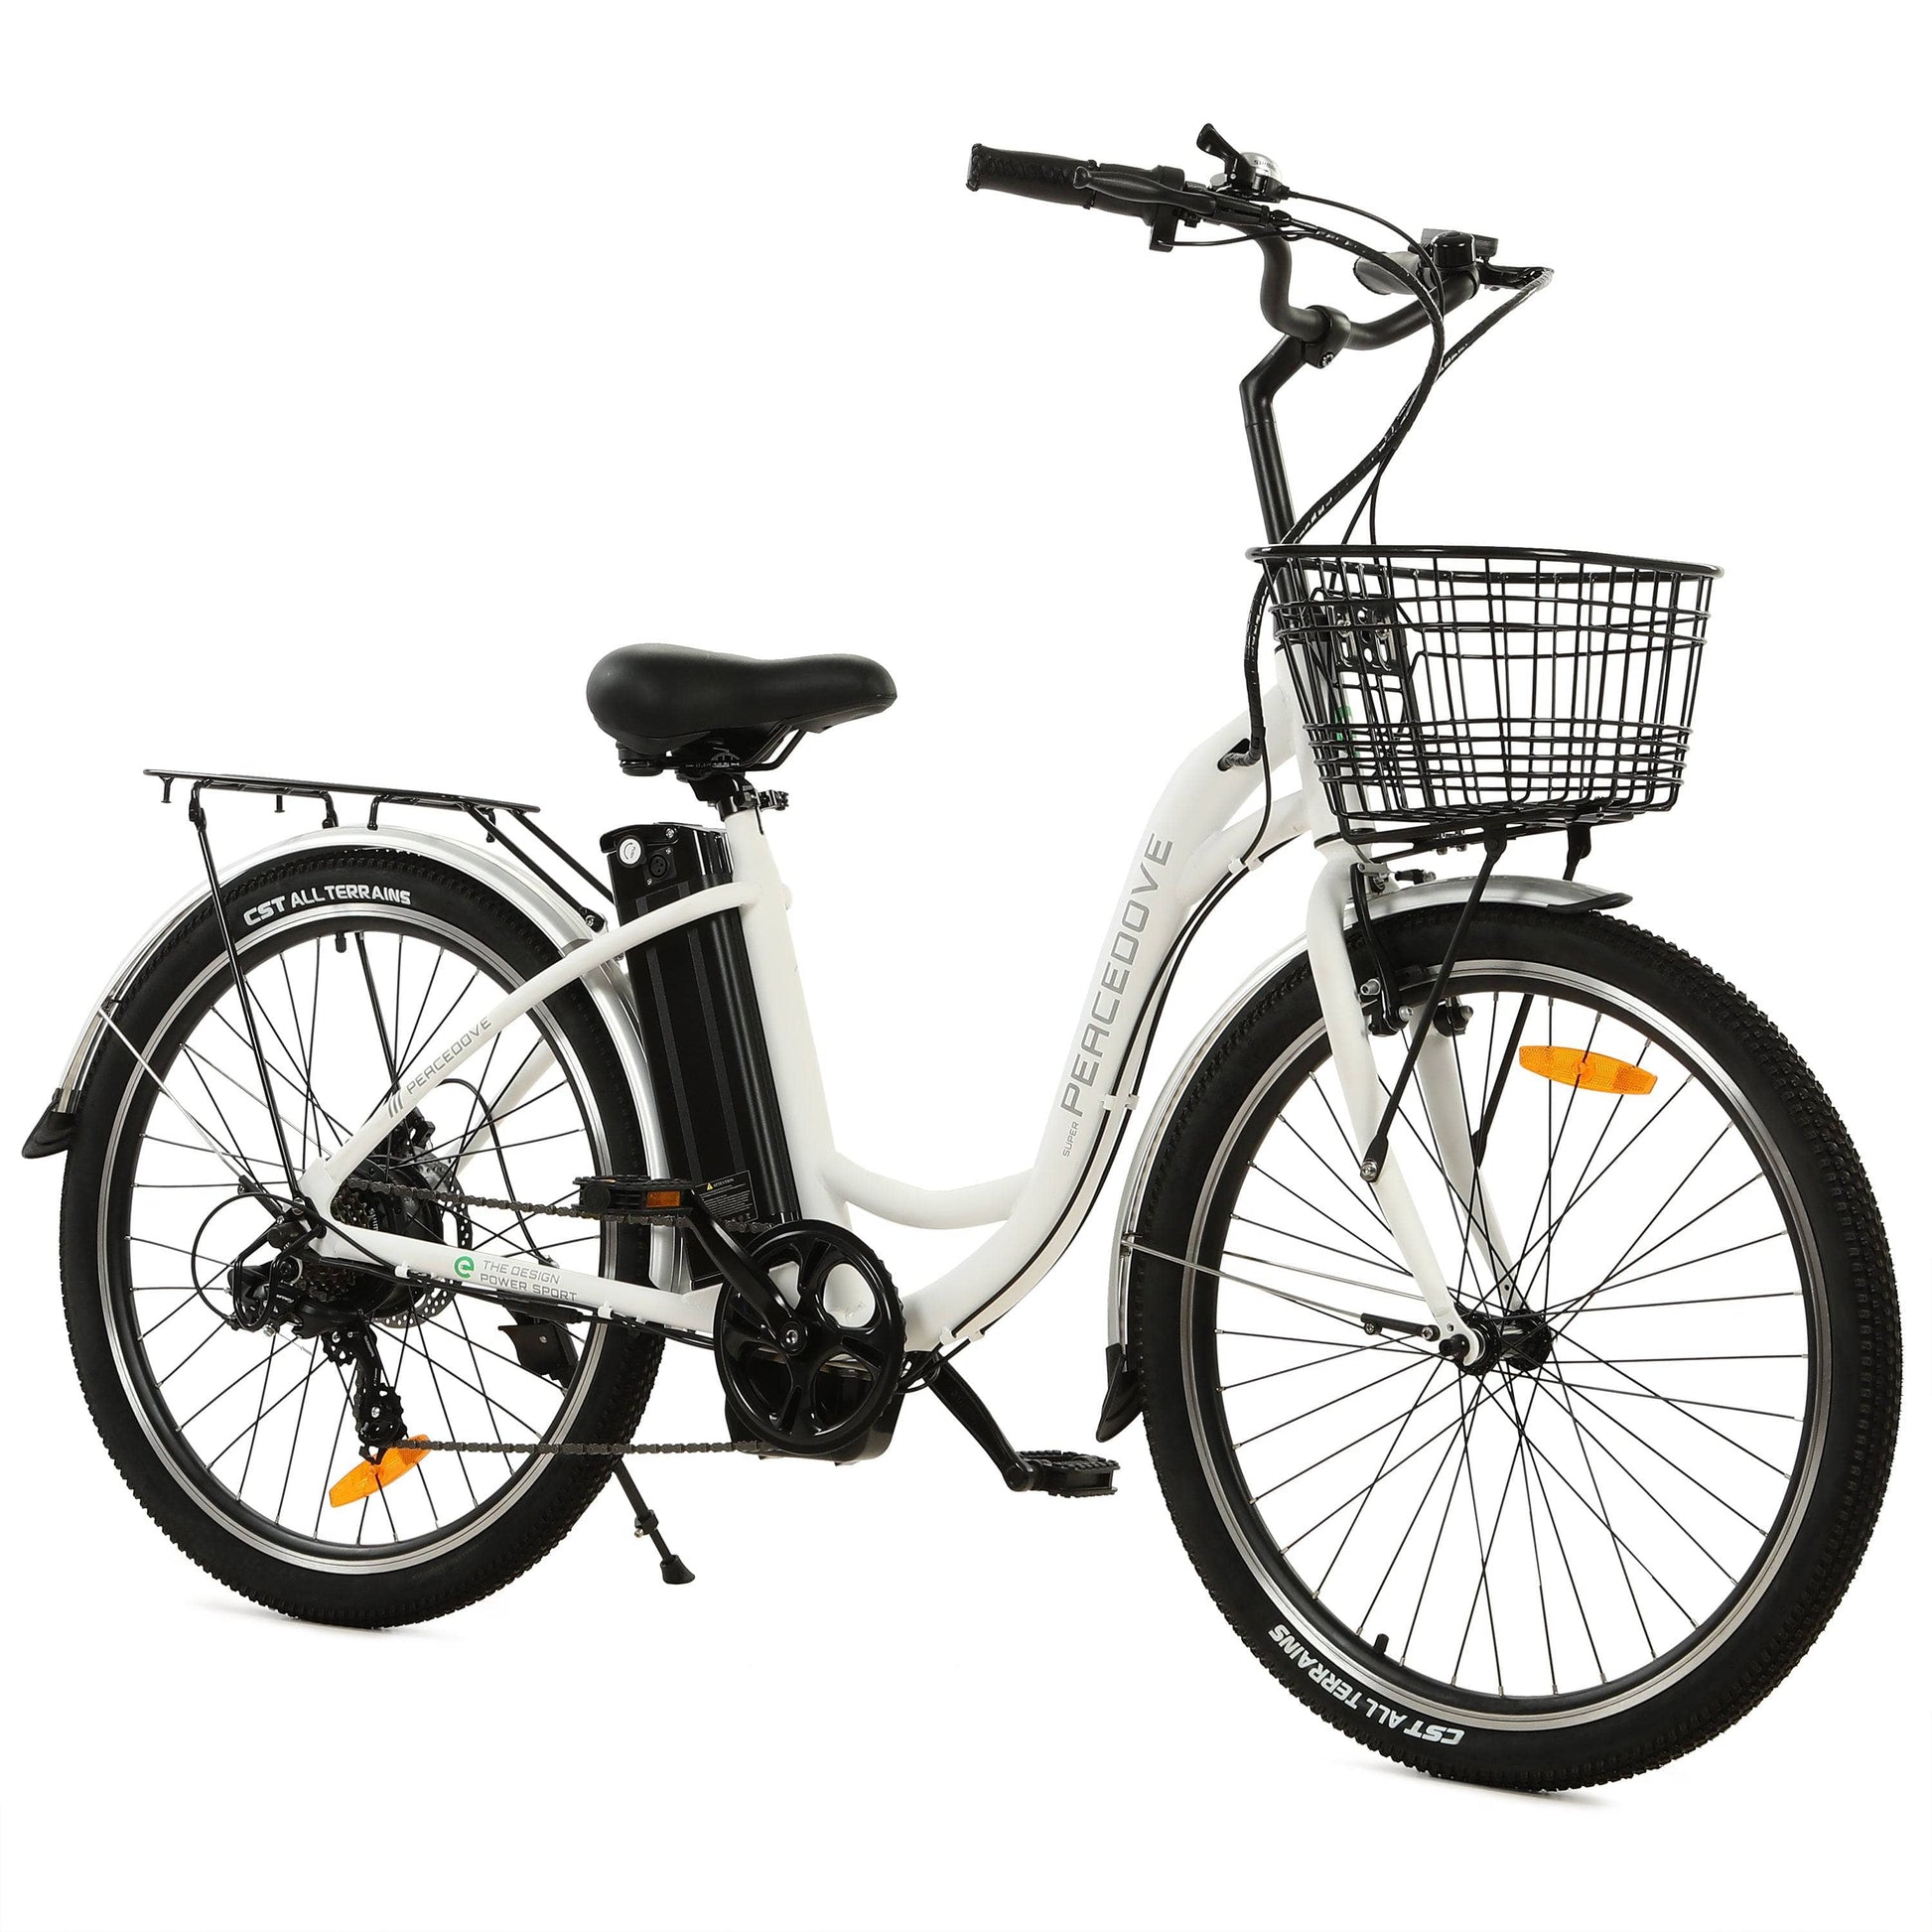 Ecotric Electric Bikes Ecotric PeaceDove 36V 350W Electric City Bike